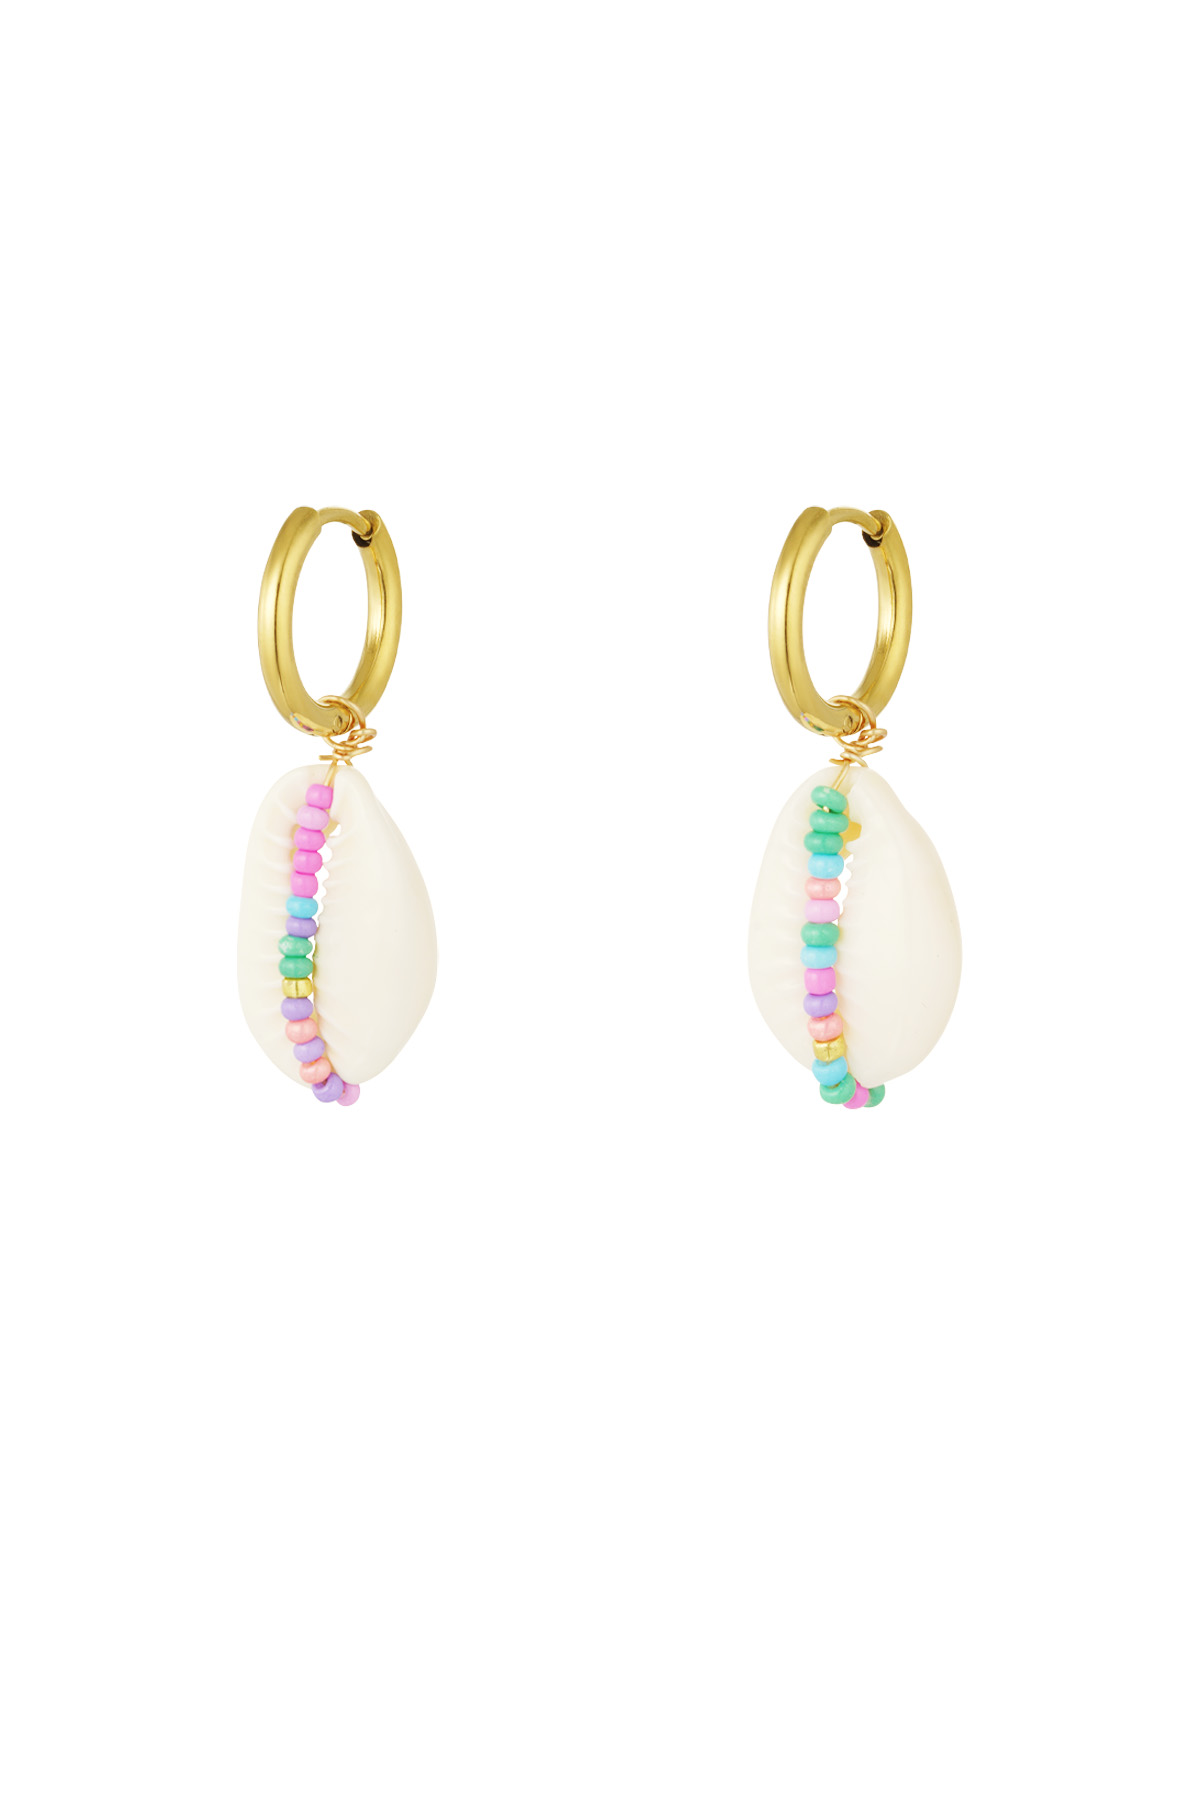 Stainless Steel Drop Earrings with Seashell and Glass Beads - Multicolored